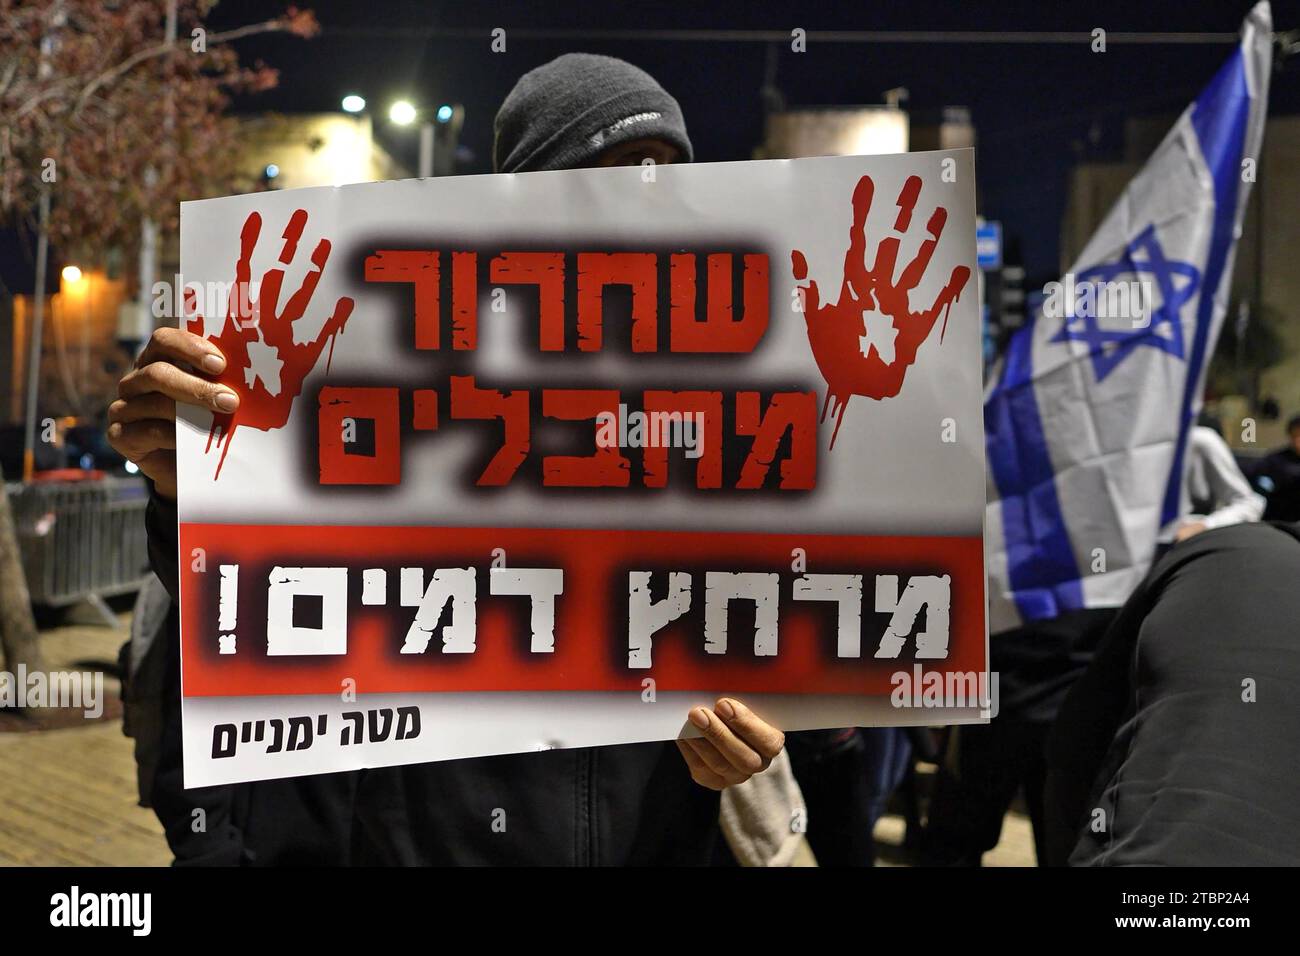 A right-wing activist holds a sign that reads 'Release of terrorists is bloodbath' during a protest dubbed the 'March of the Maccabees' outside Jerusalem Old City on December 7, 2023 in Jerusalem. The protest was organized to memorialize victims of the Israel-Hamas war, while also demanding that the entirety of Jerusalem, including the Temple Mount/Al-Aqsa Mosque compound, be placed under Jewish control. Stock Photo